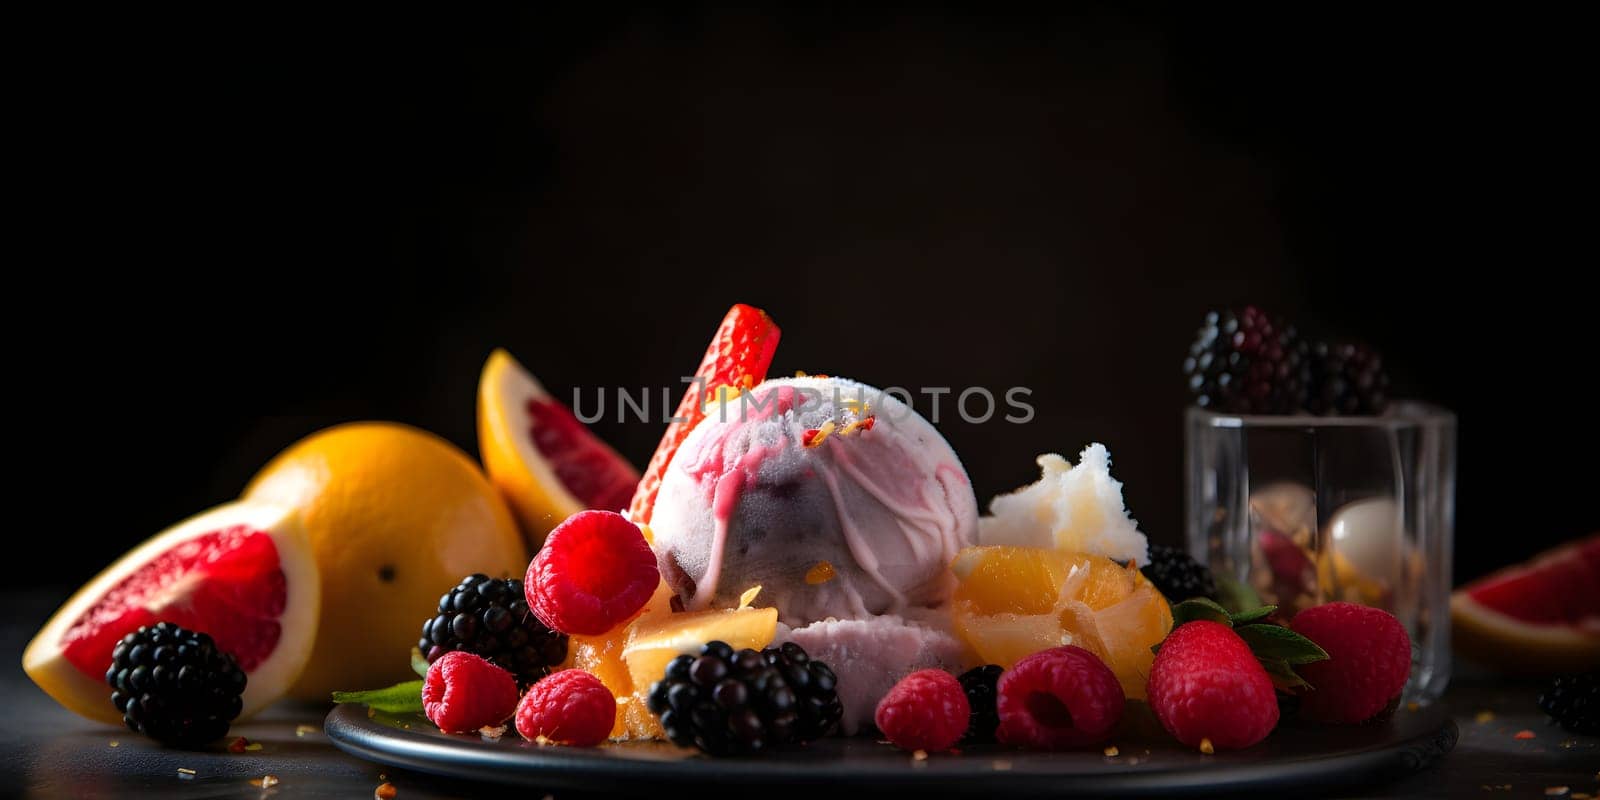 pink icecream with fresh fruits, rich high contrast photorealistic image. Neural network generated in May 2023. Not based on any actual scene or pattern.